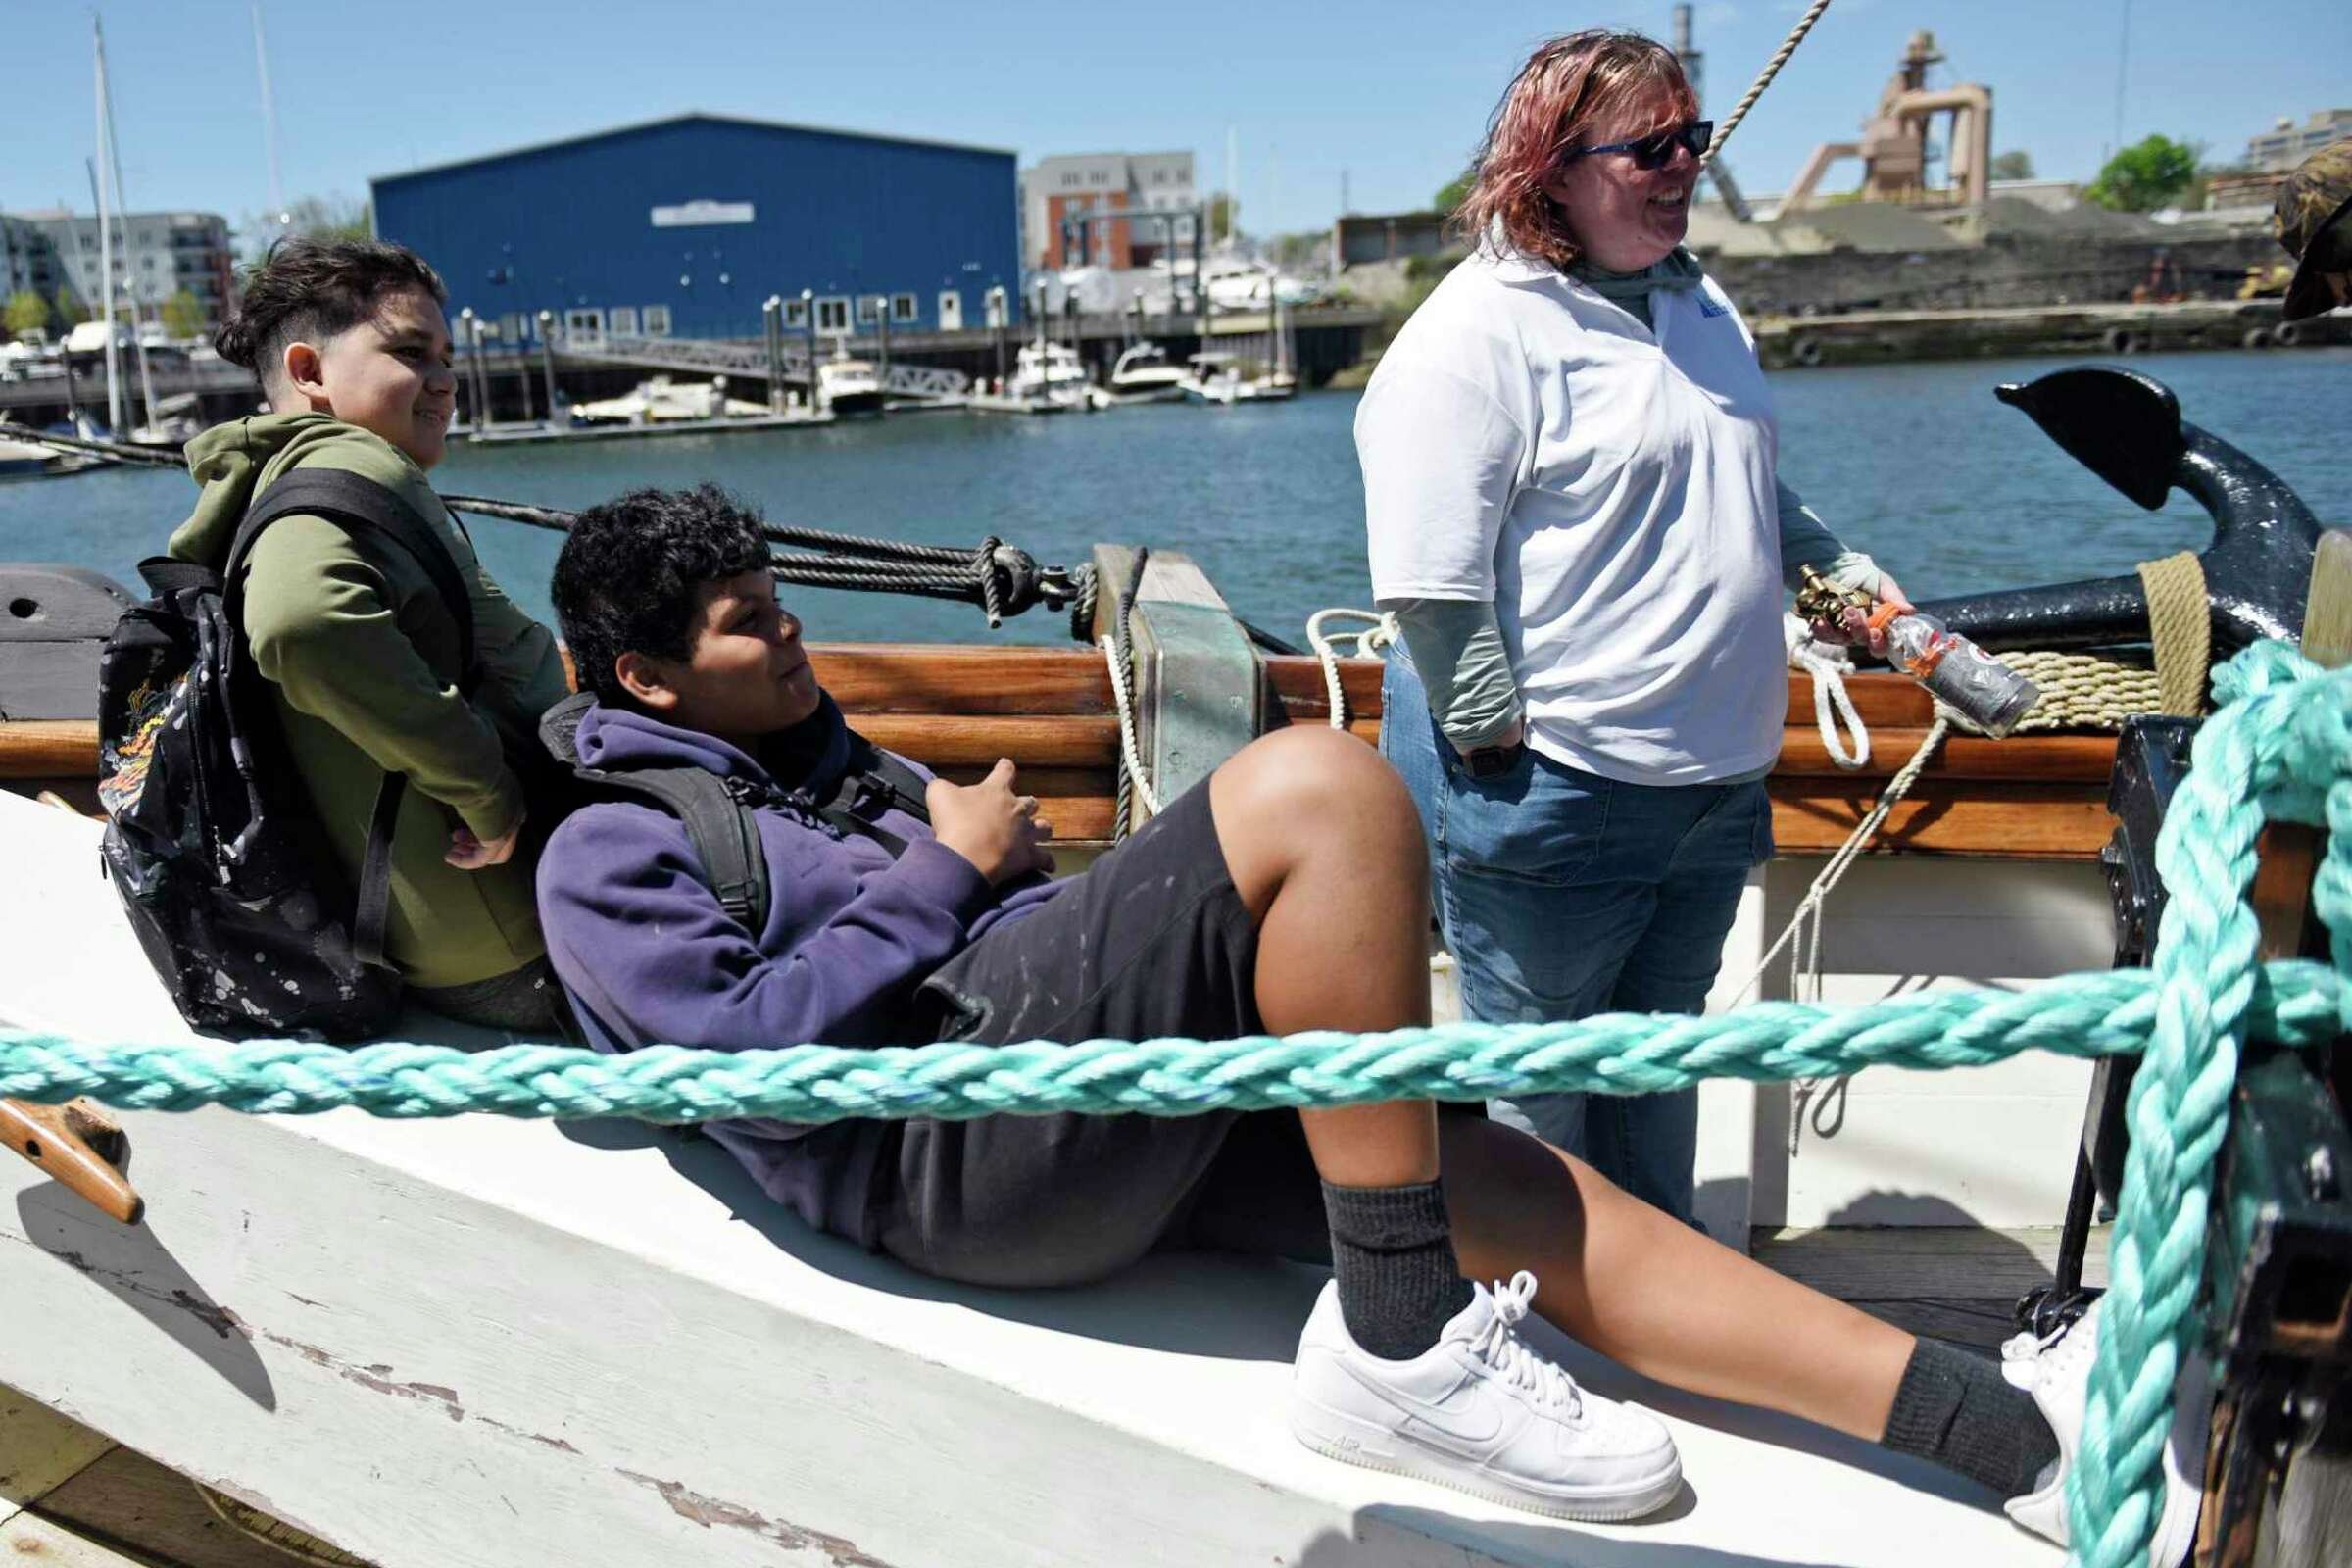  Eighth-graders Sergio Espina, left, and Eduardo Quintana listen to history lesson aboard a reproduction of the Amistad slave ship docked at Harbor Point in Stamford, Conn. Monday, May 9, 2022. Eighth grade students toured the ship to kick off the ne